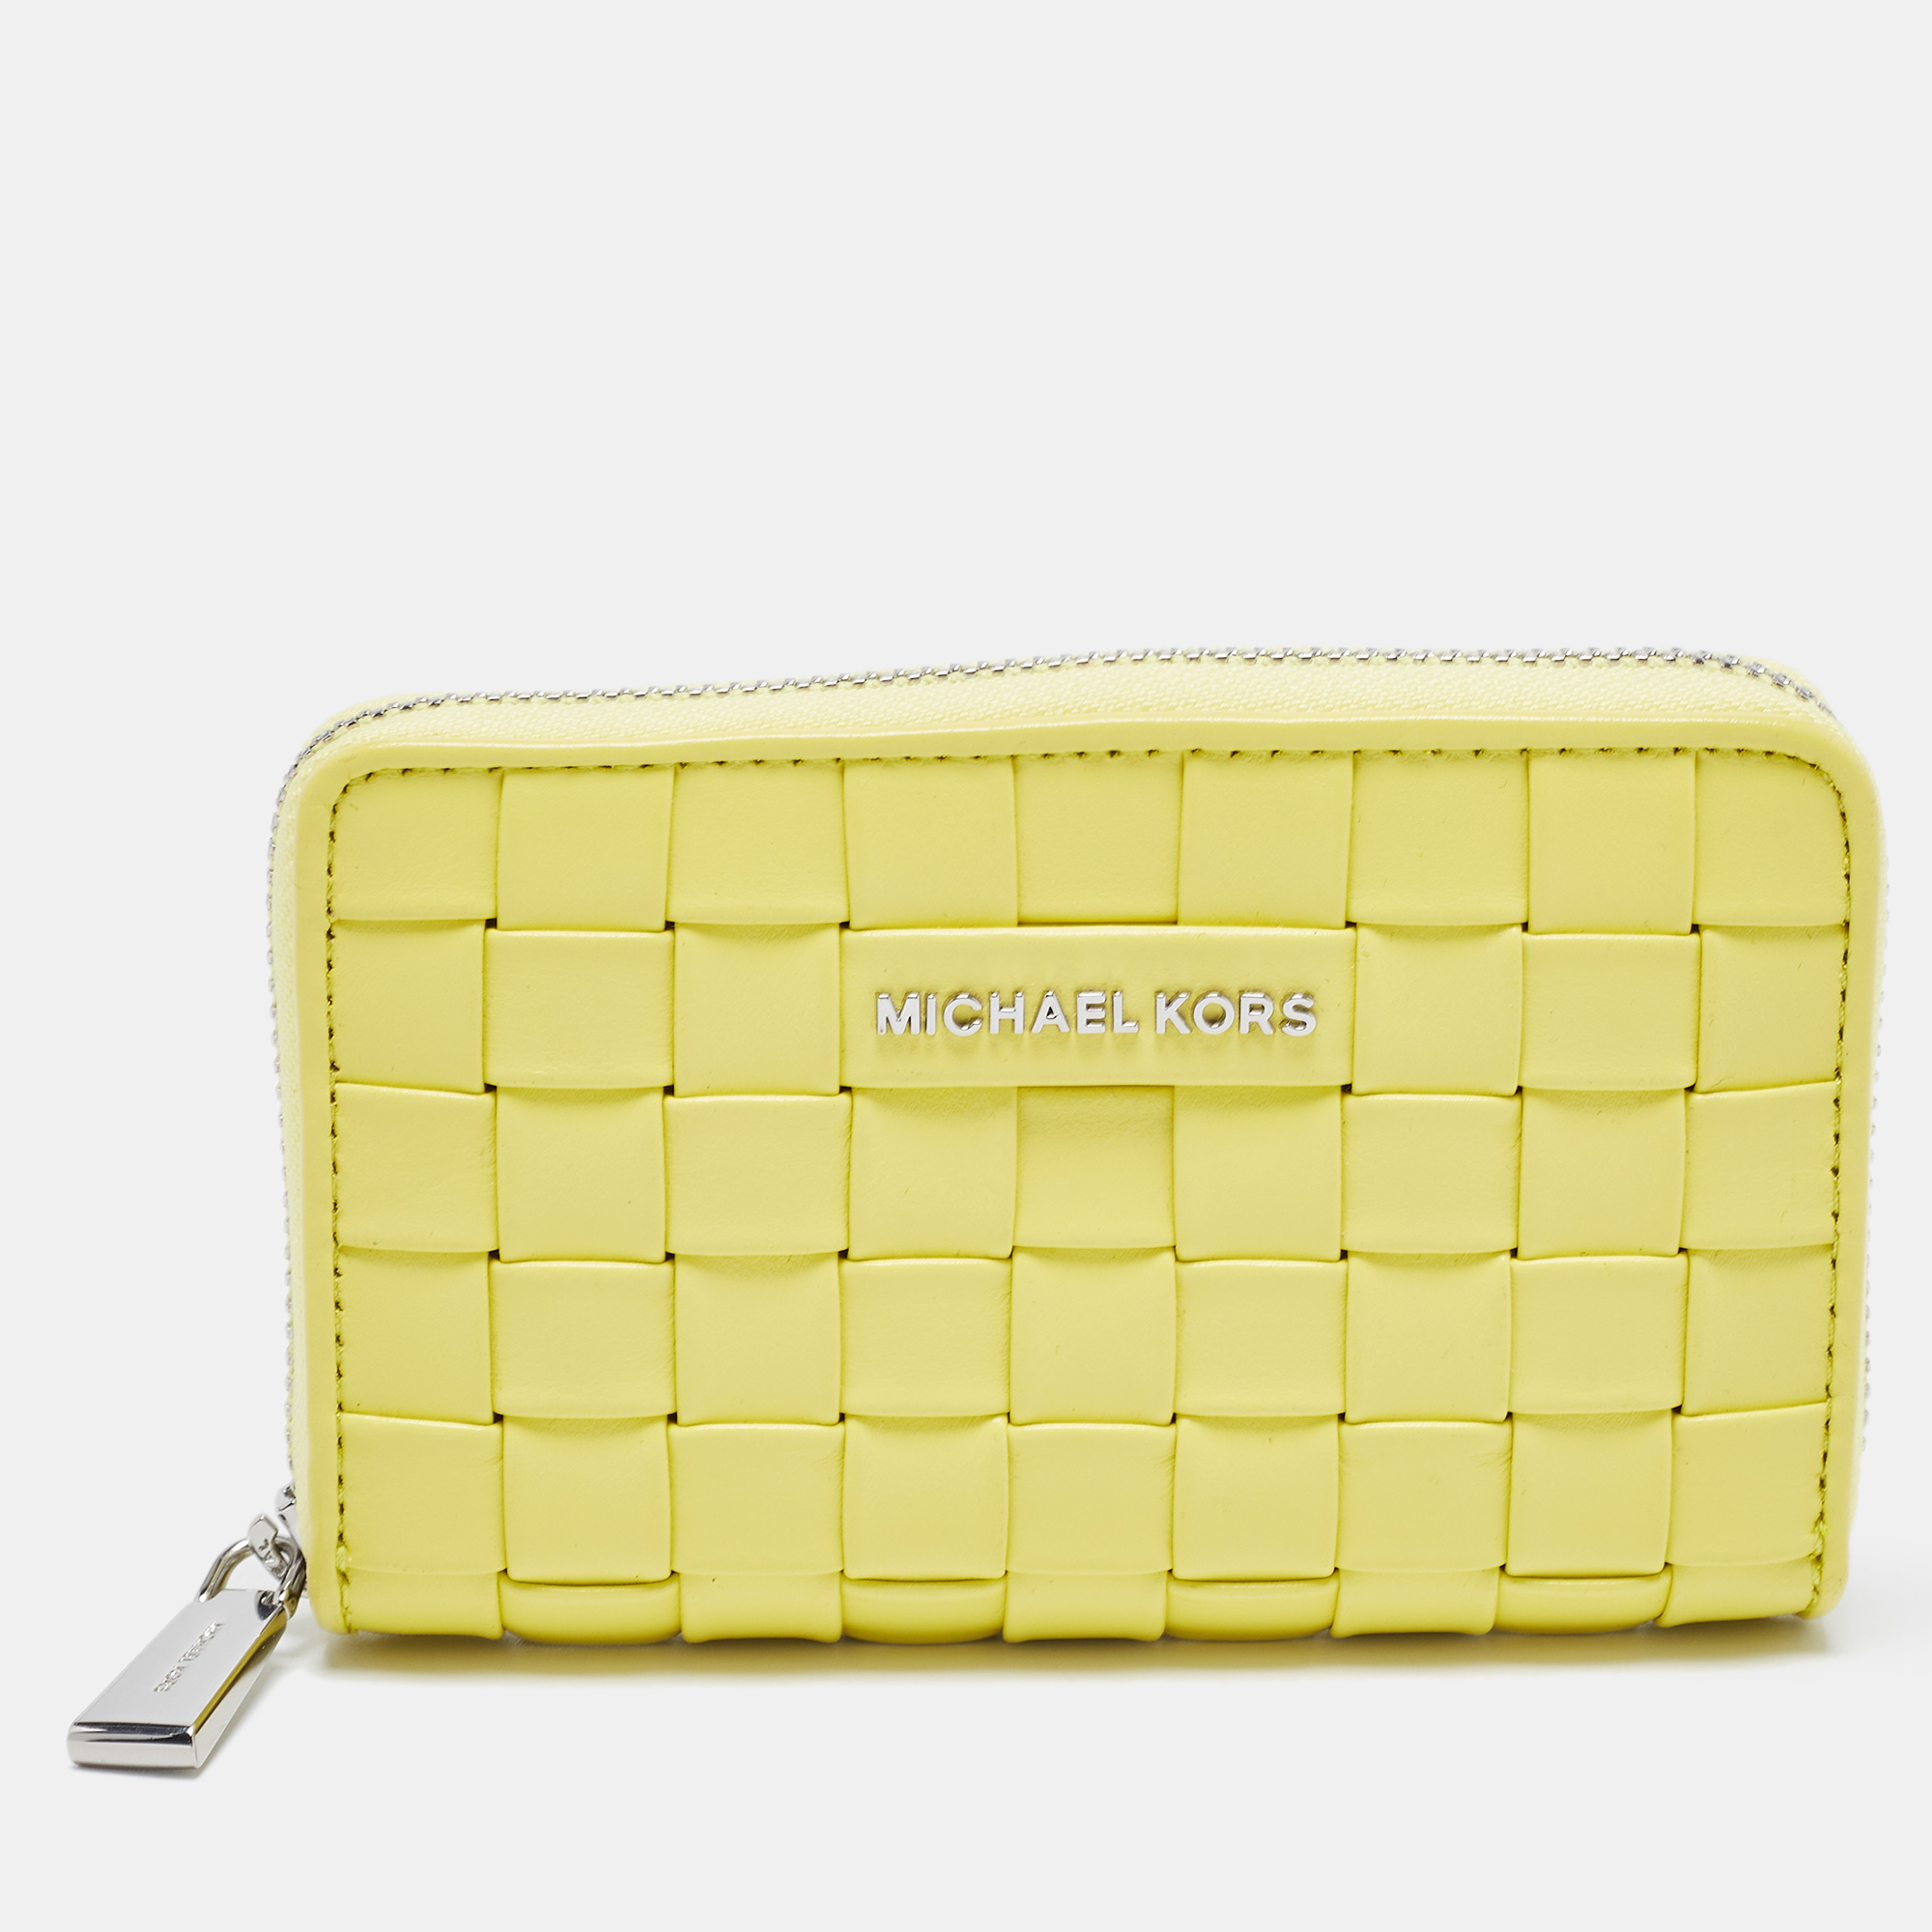 Pre-owned Michael Kors Yellow Intrecciato Leather Zip Around Compact Wallet